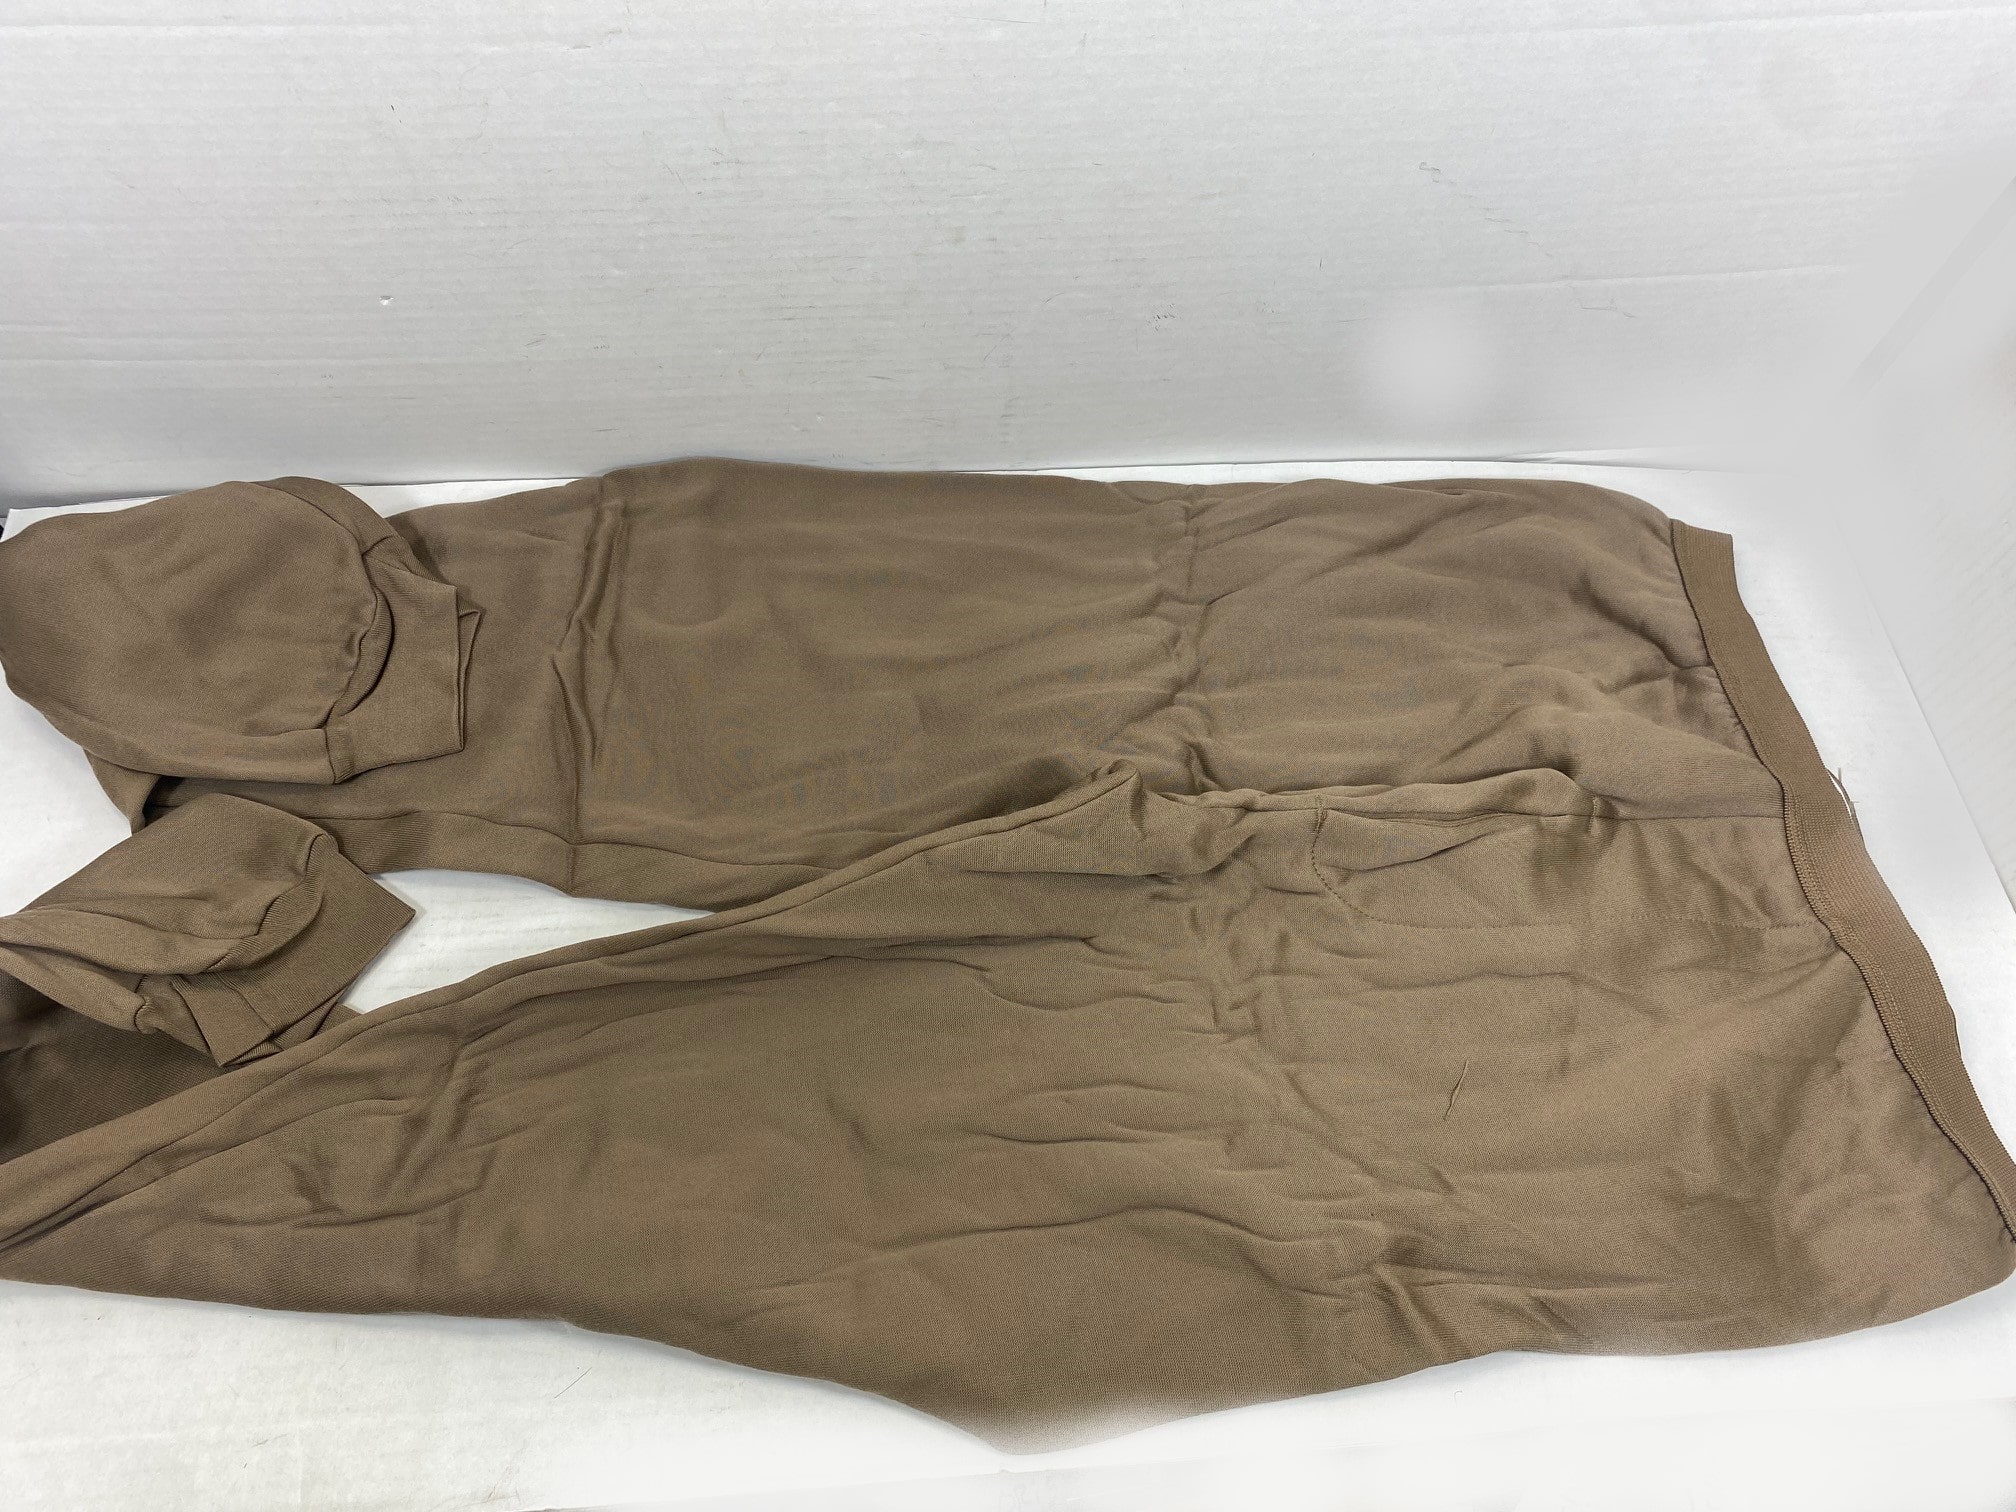 Polypro Thermals, Pants. Brown size 3XL, New - Omahas Army Navy Surplus